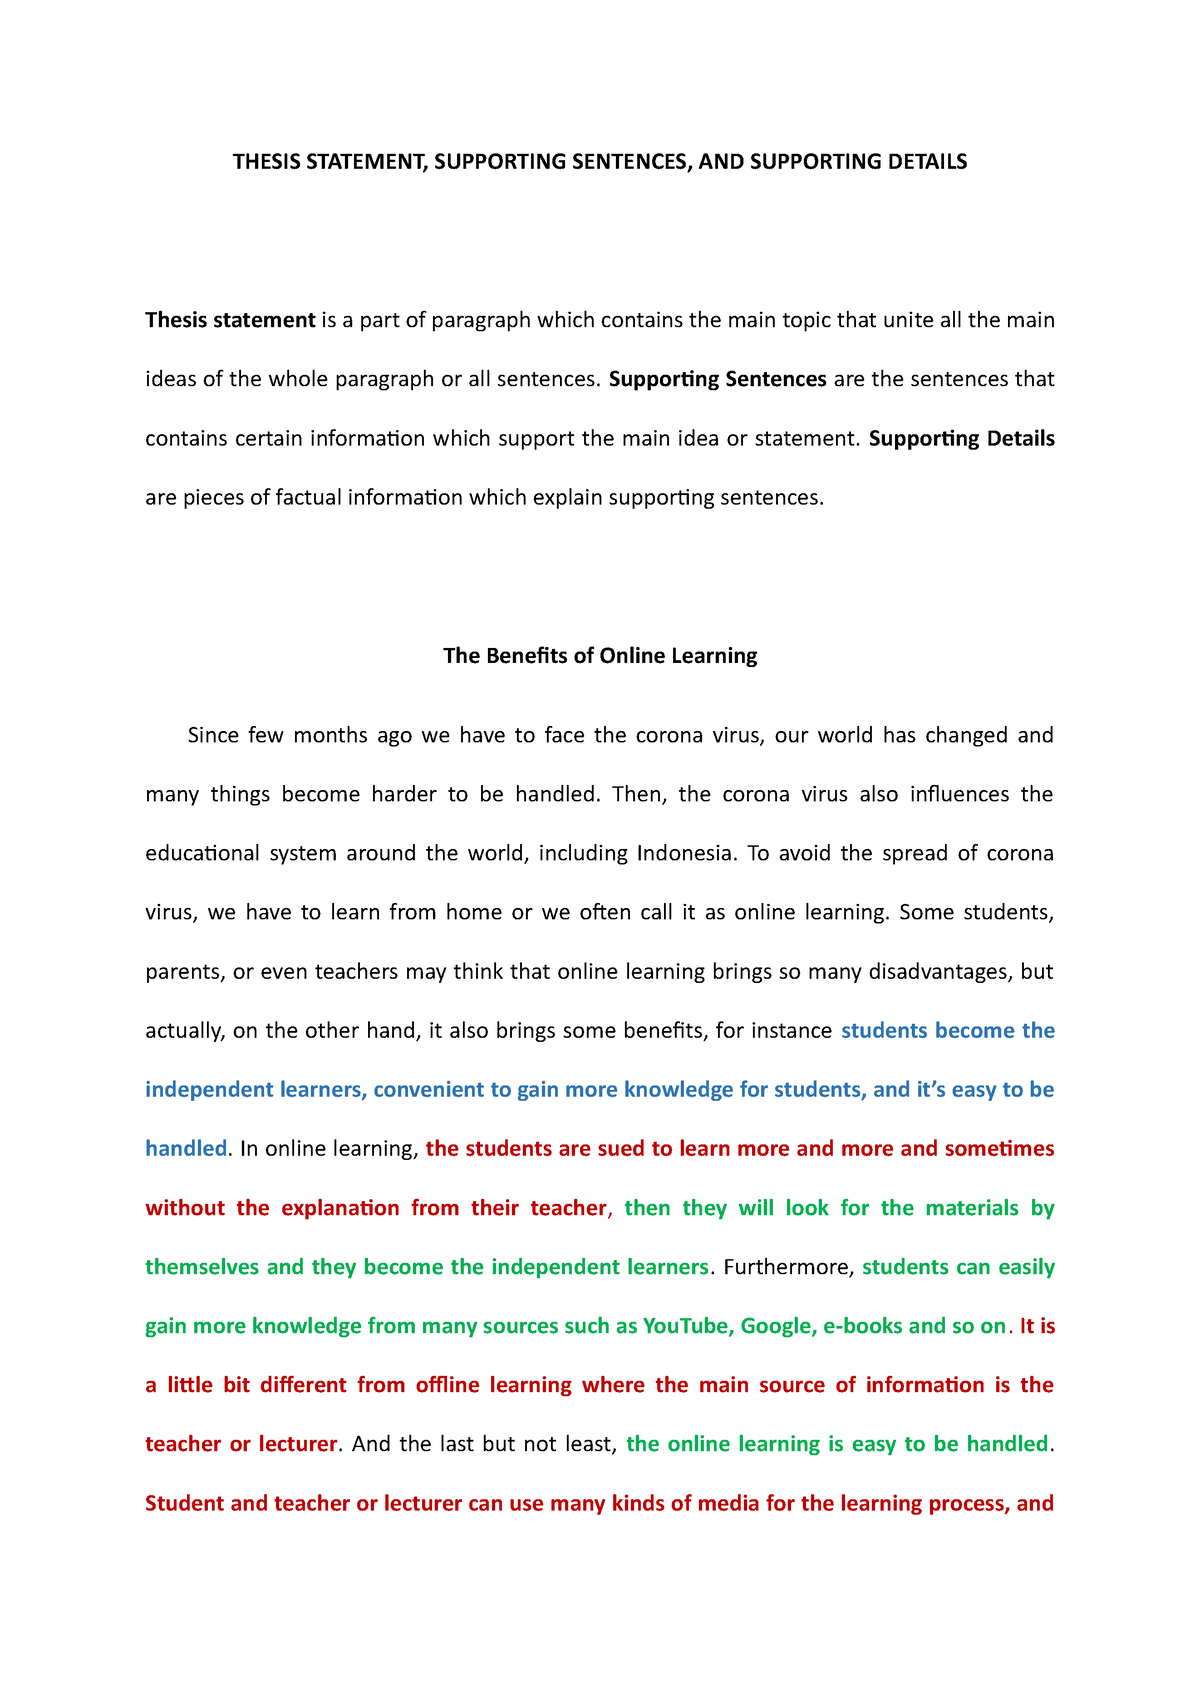 thesis statement topic sentences supporting details and conclusion